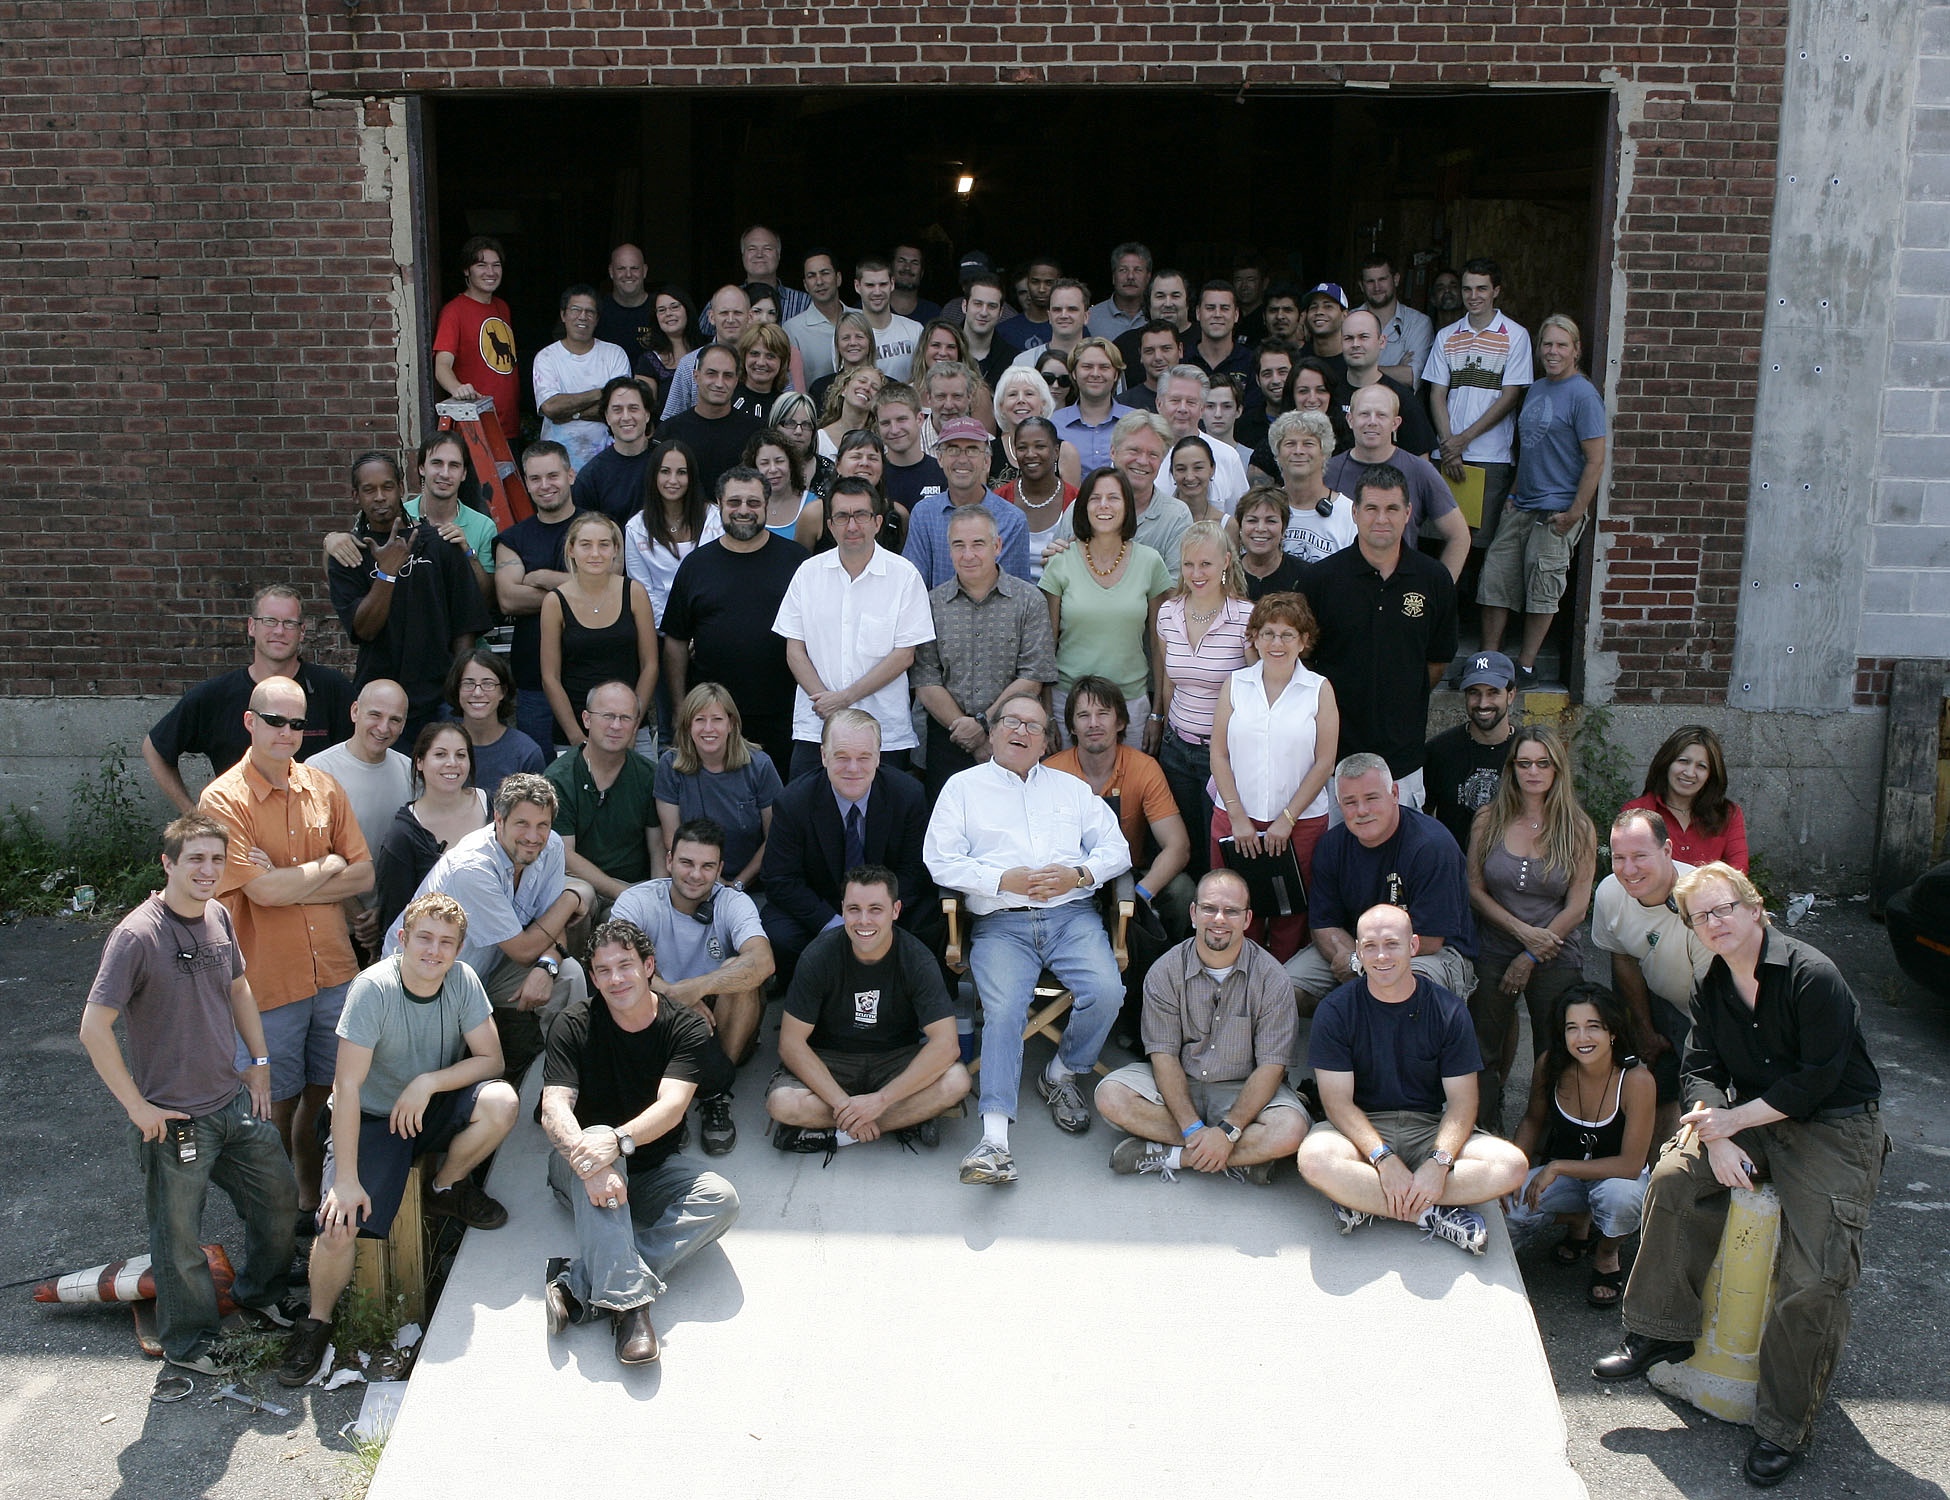 Cast and crew of The devil wrap August 23, 2006